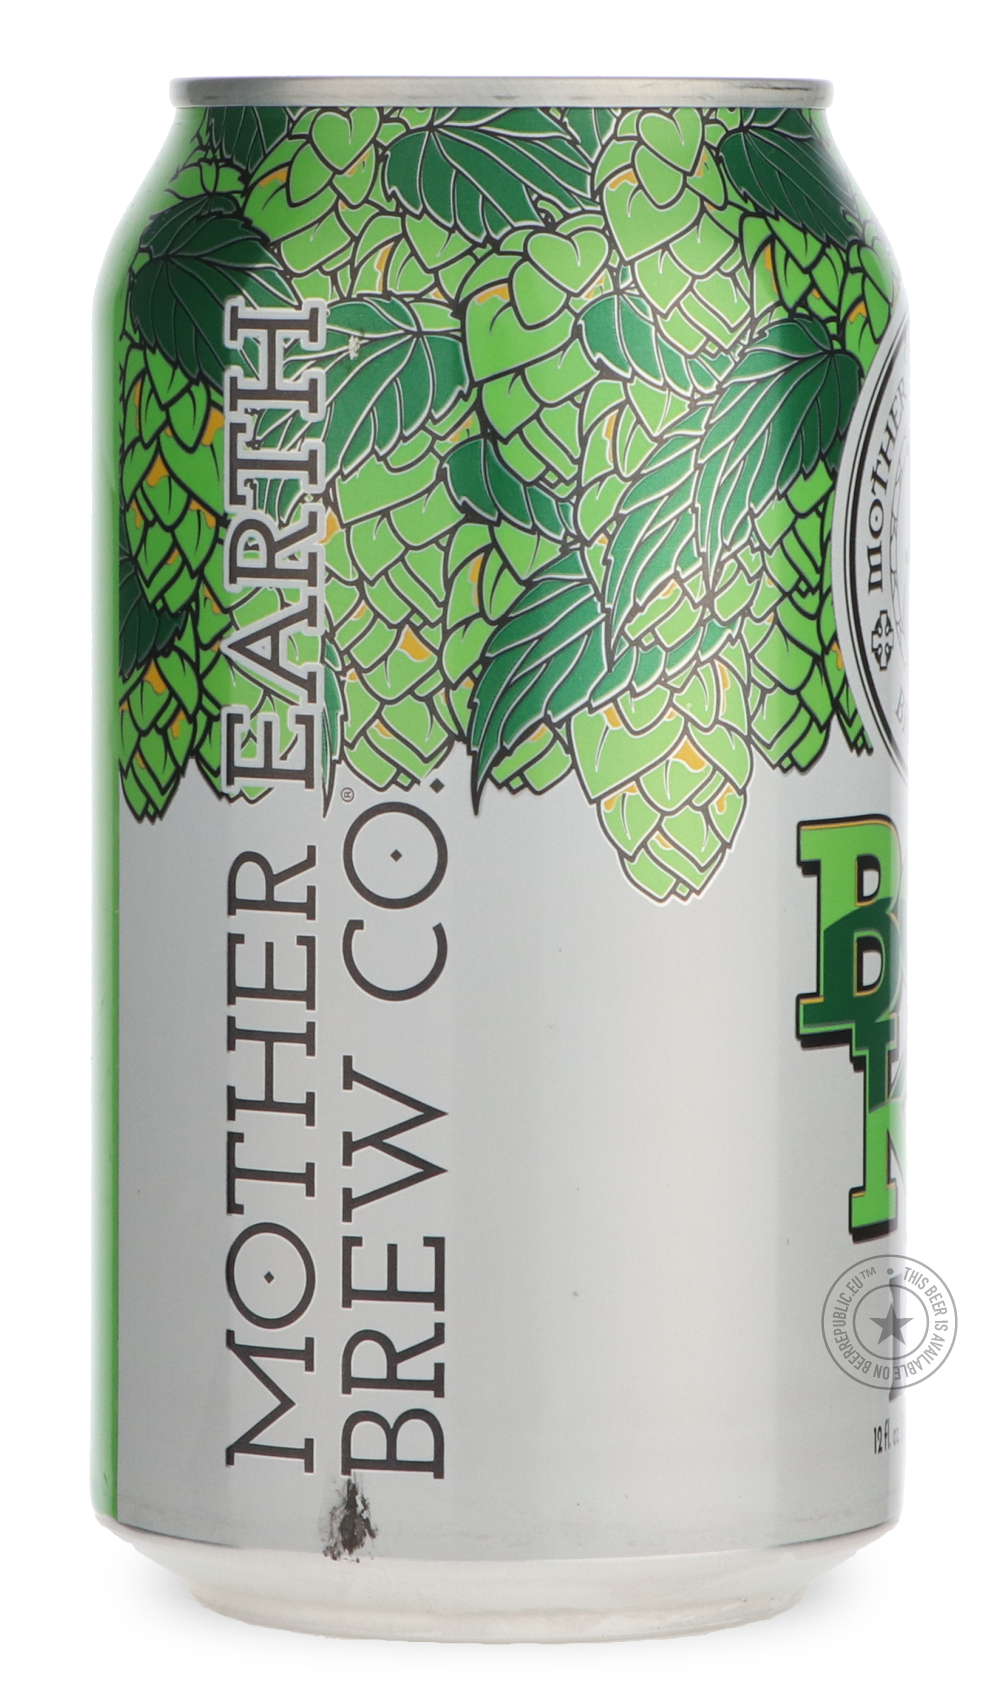 -Mother Earth- Boo Koo-IPA- Only @ Beer Republic - The best online beer store for American & Canadian craft beer - Buy beer online from the USA and Canada - Bier online kopen - Amerikaans bier kopen - Craft beer store - Craft beer kopen - Amerikanisch bier kaufen - Bier online kaufen - Acheter biere online - IPA - Stout - Porter - New England IPA - Hazy IPA - Imperial Stout - Barrel Aged - Barrel Aged Imperial Stout - Brown - Dark beer - Blond - Blonde - Pilsner - Lager - Wheat - Weizen - Amber - Barley Win